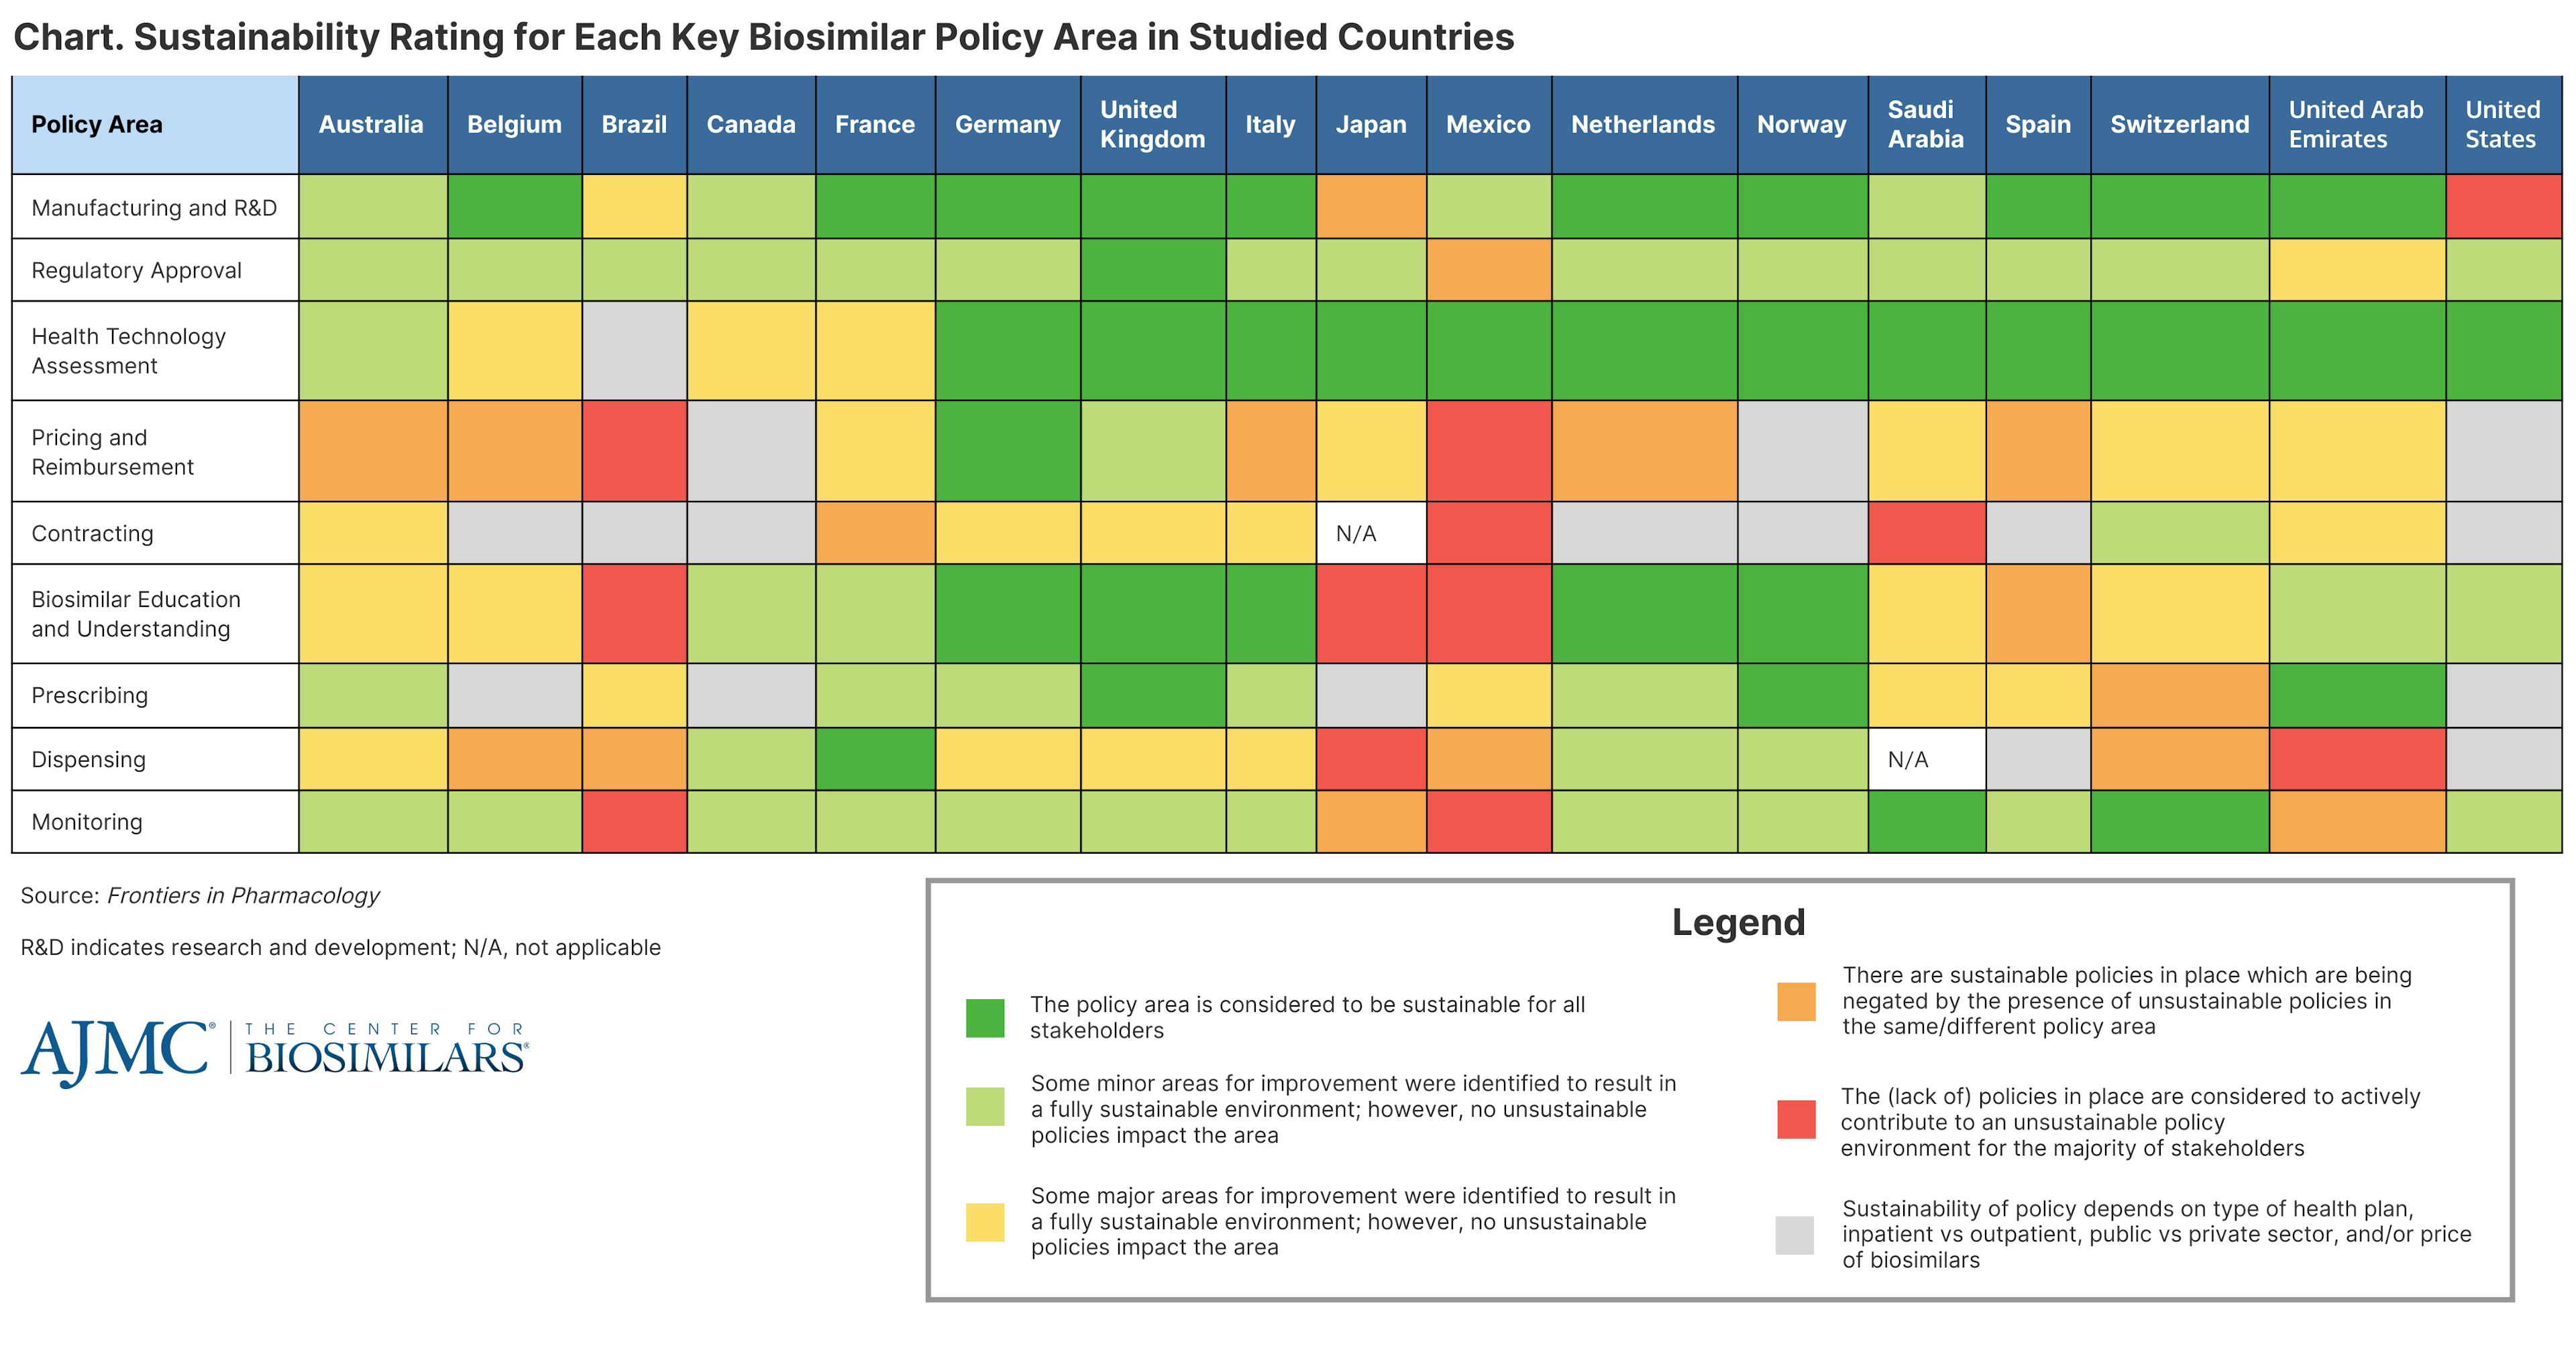 Chart. Sustainability Rating for Each Key Biosimilar Policy Area in Studied Countries